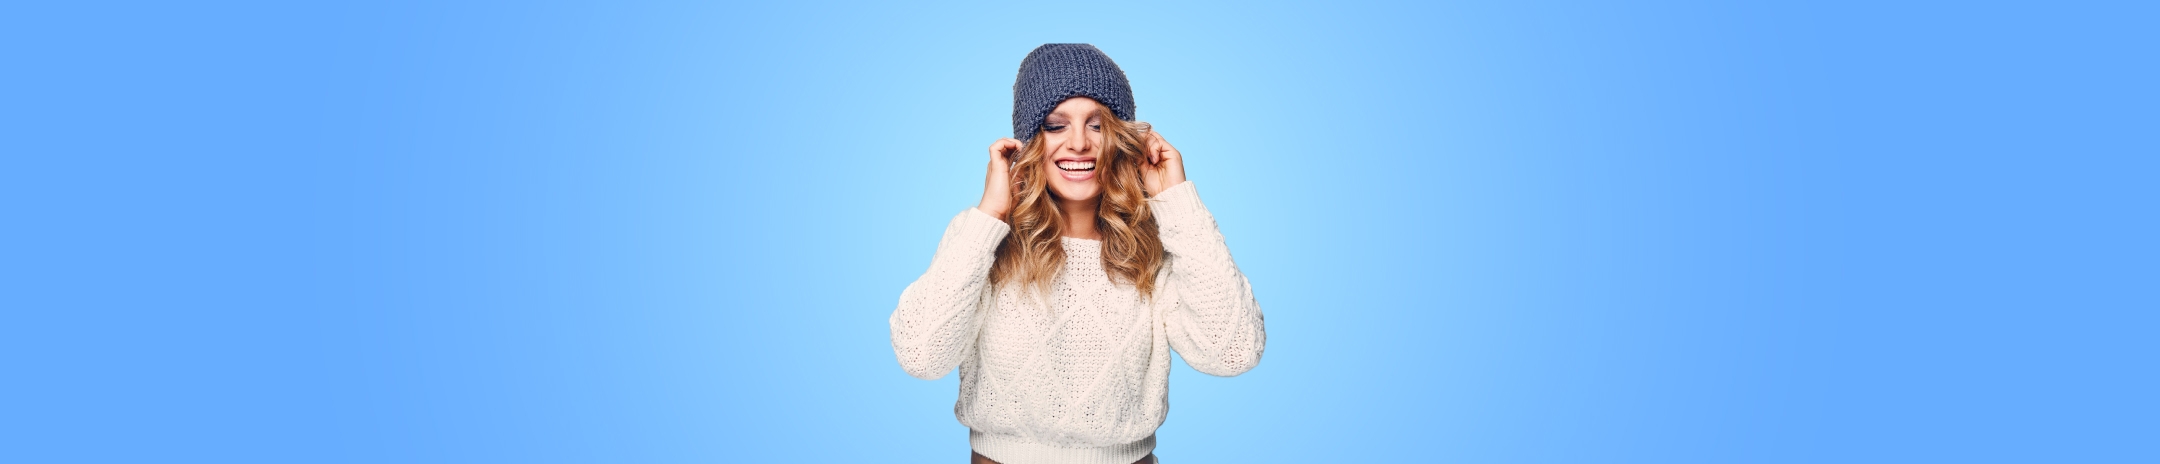 Girl smiling in cream sweater and blue knit hat, in front of a light blue gradient background